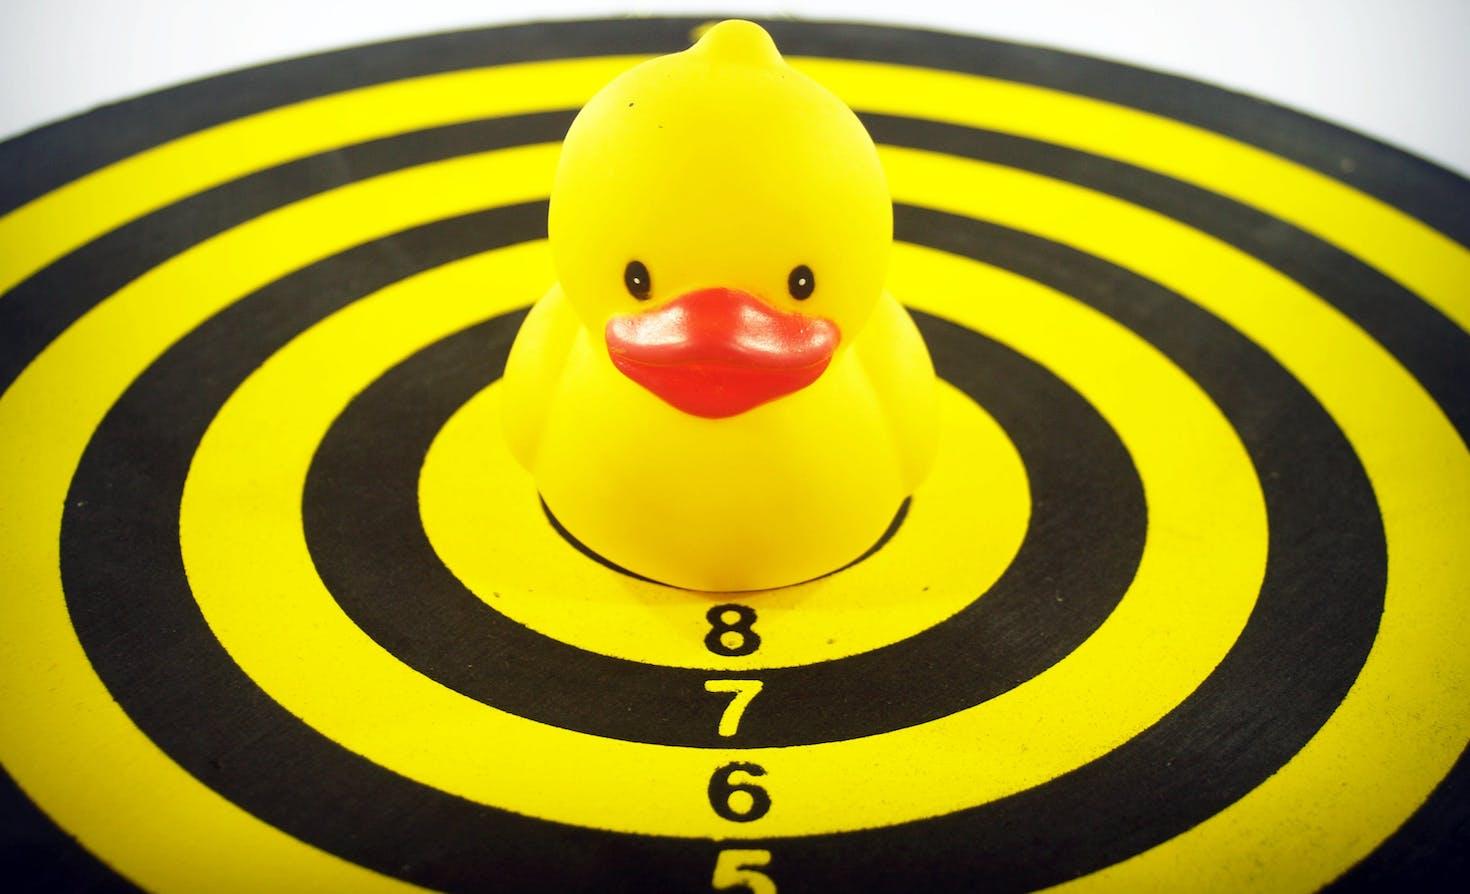 A plastic duck sits inside a target.